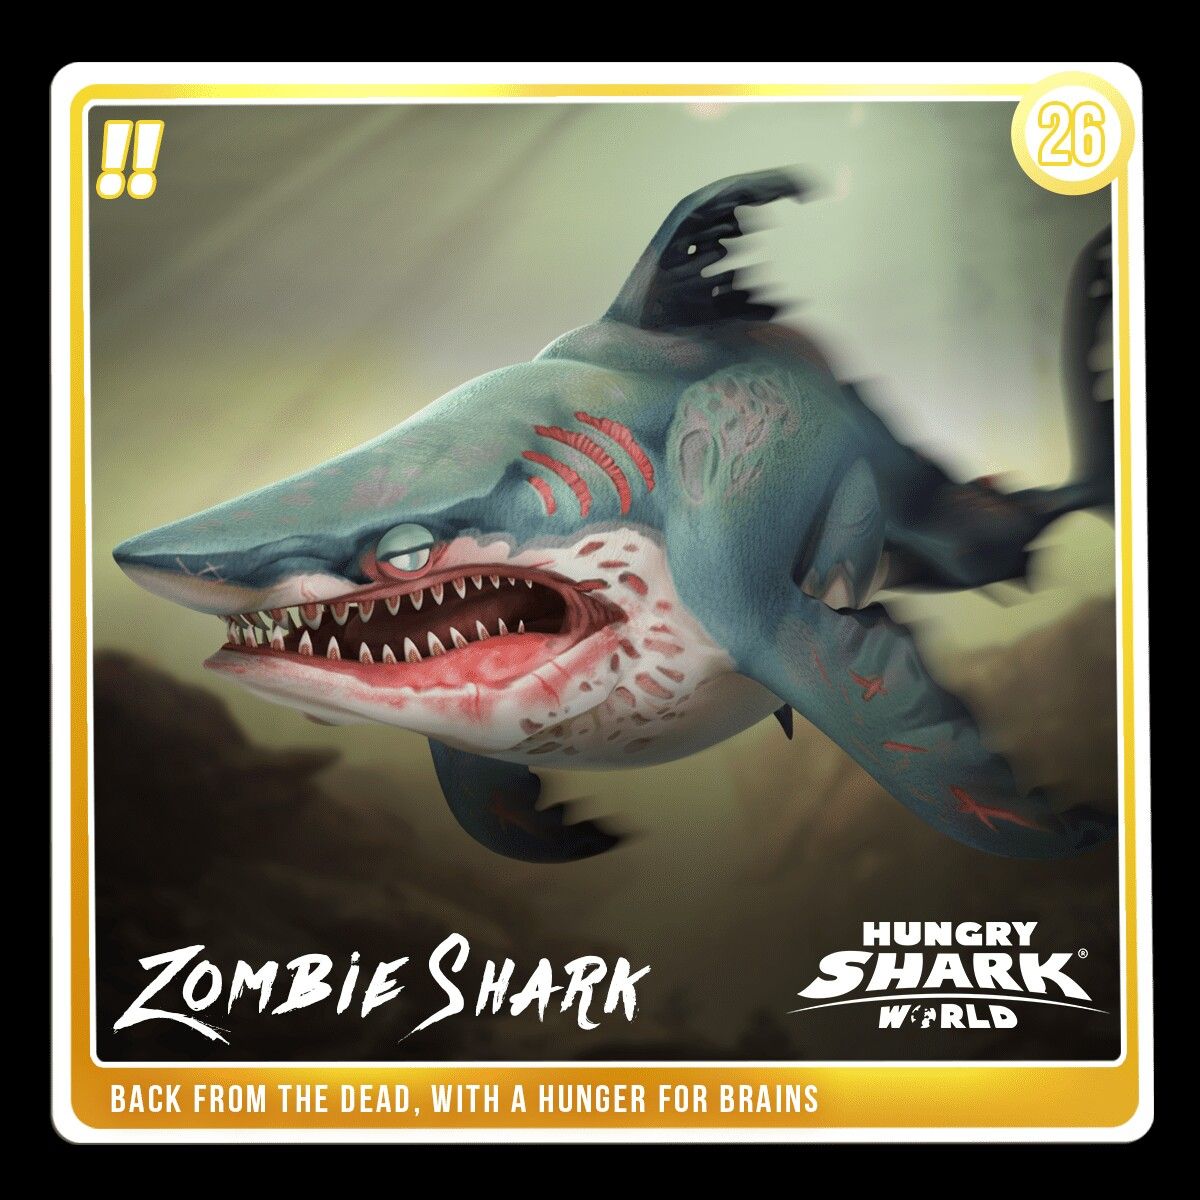 danger zombies and sharks book $11.99